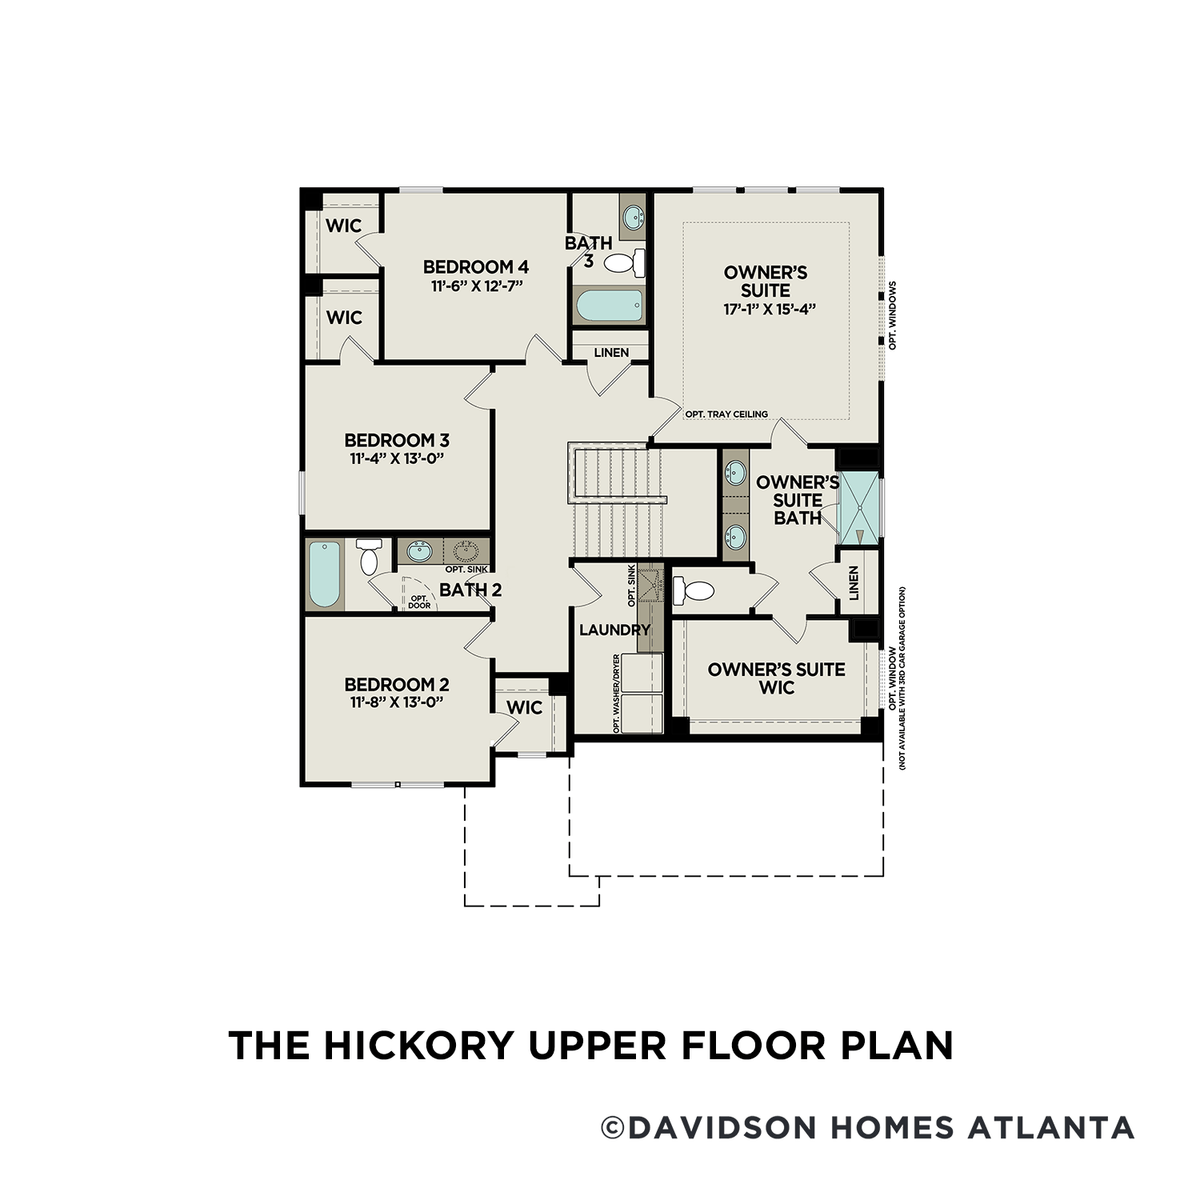 2 - The Hickory C- Unfinished Basement floor plan layout for 40 Brookside Way in Davidson Homes' Mountainbrook community.